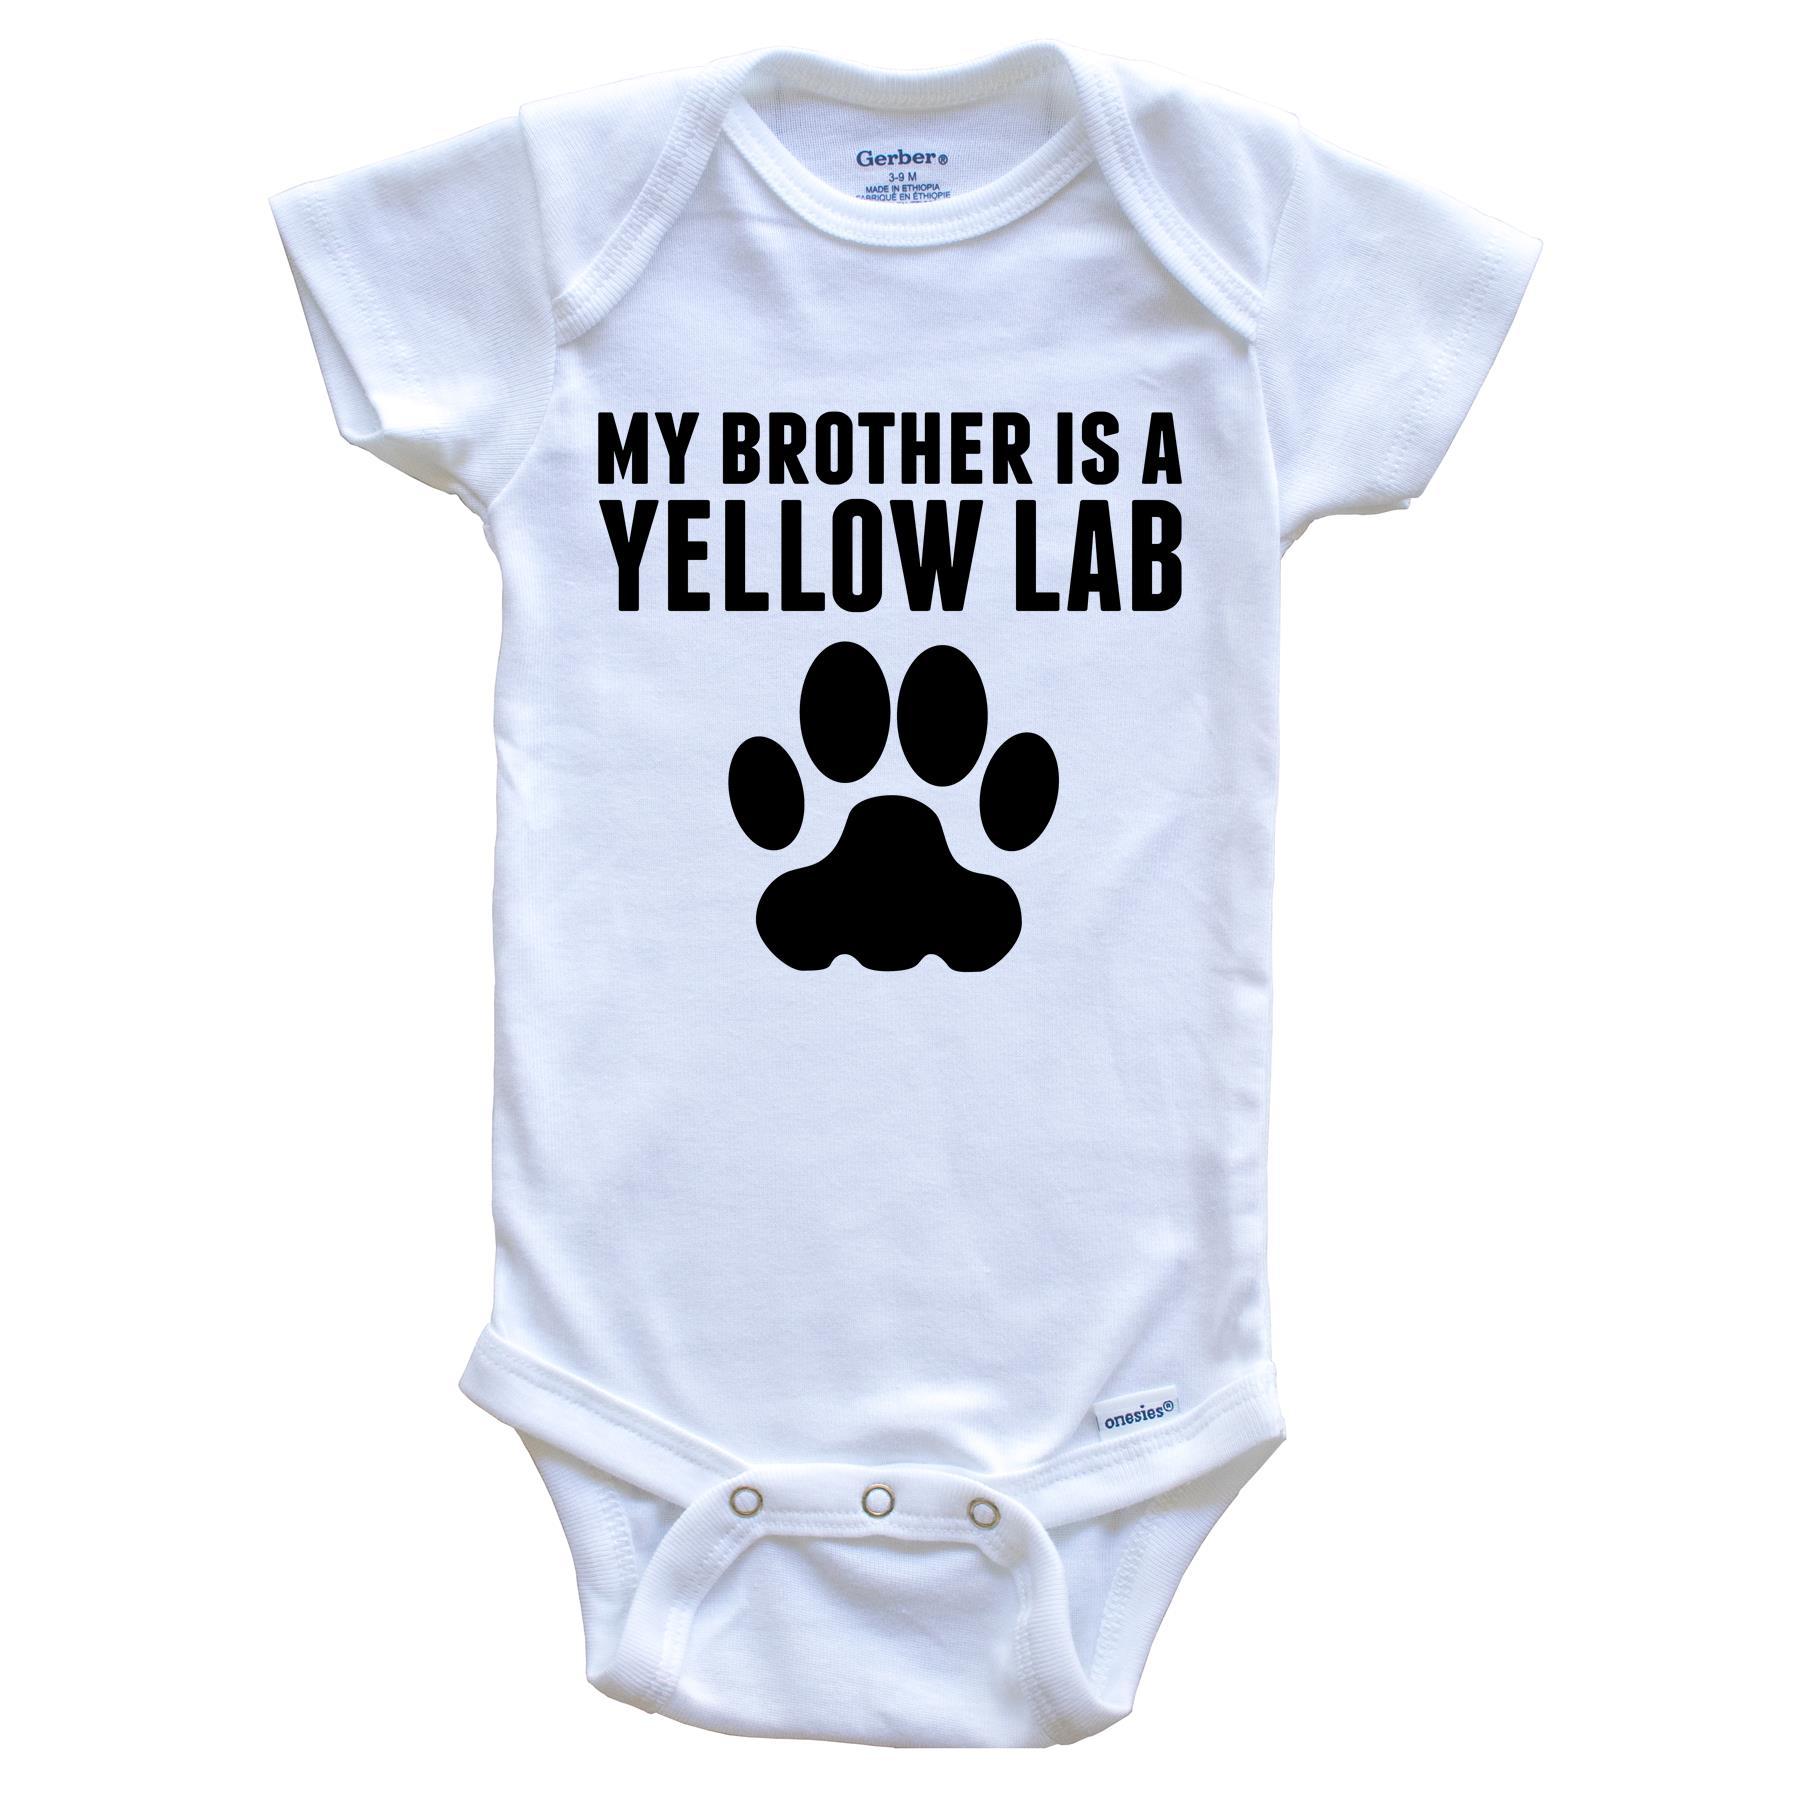 My Brother Is A Yellow Lab Baby Onesie